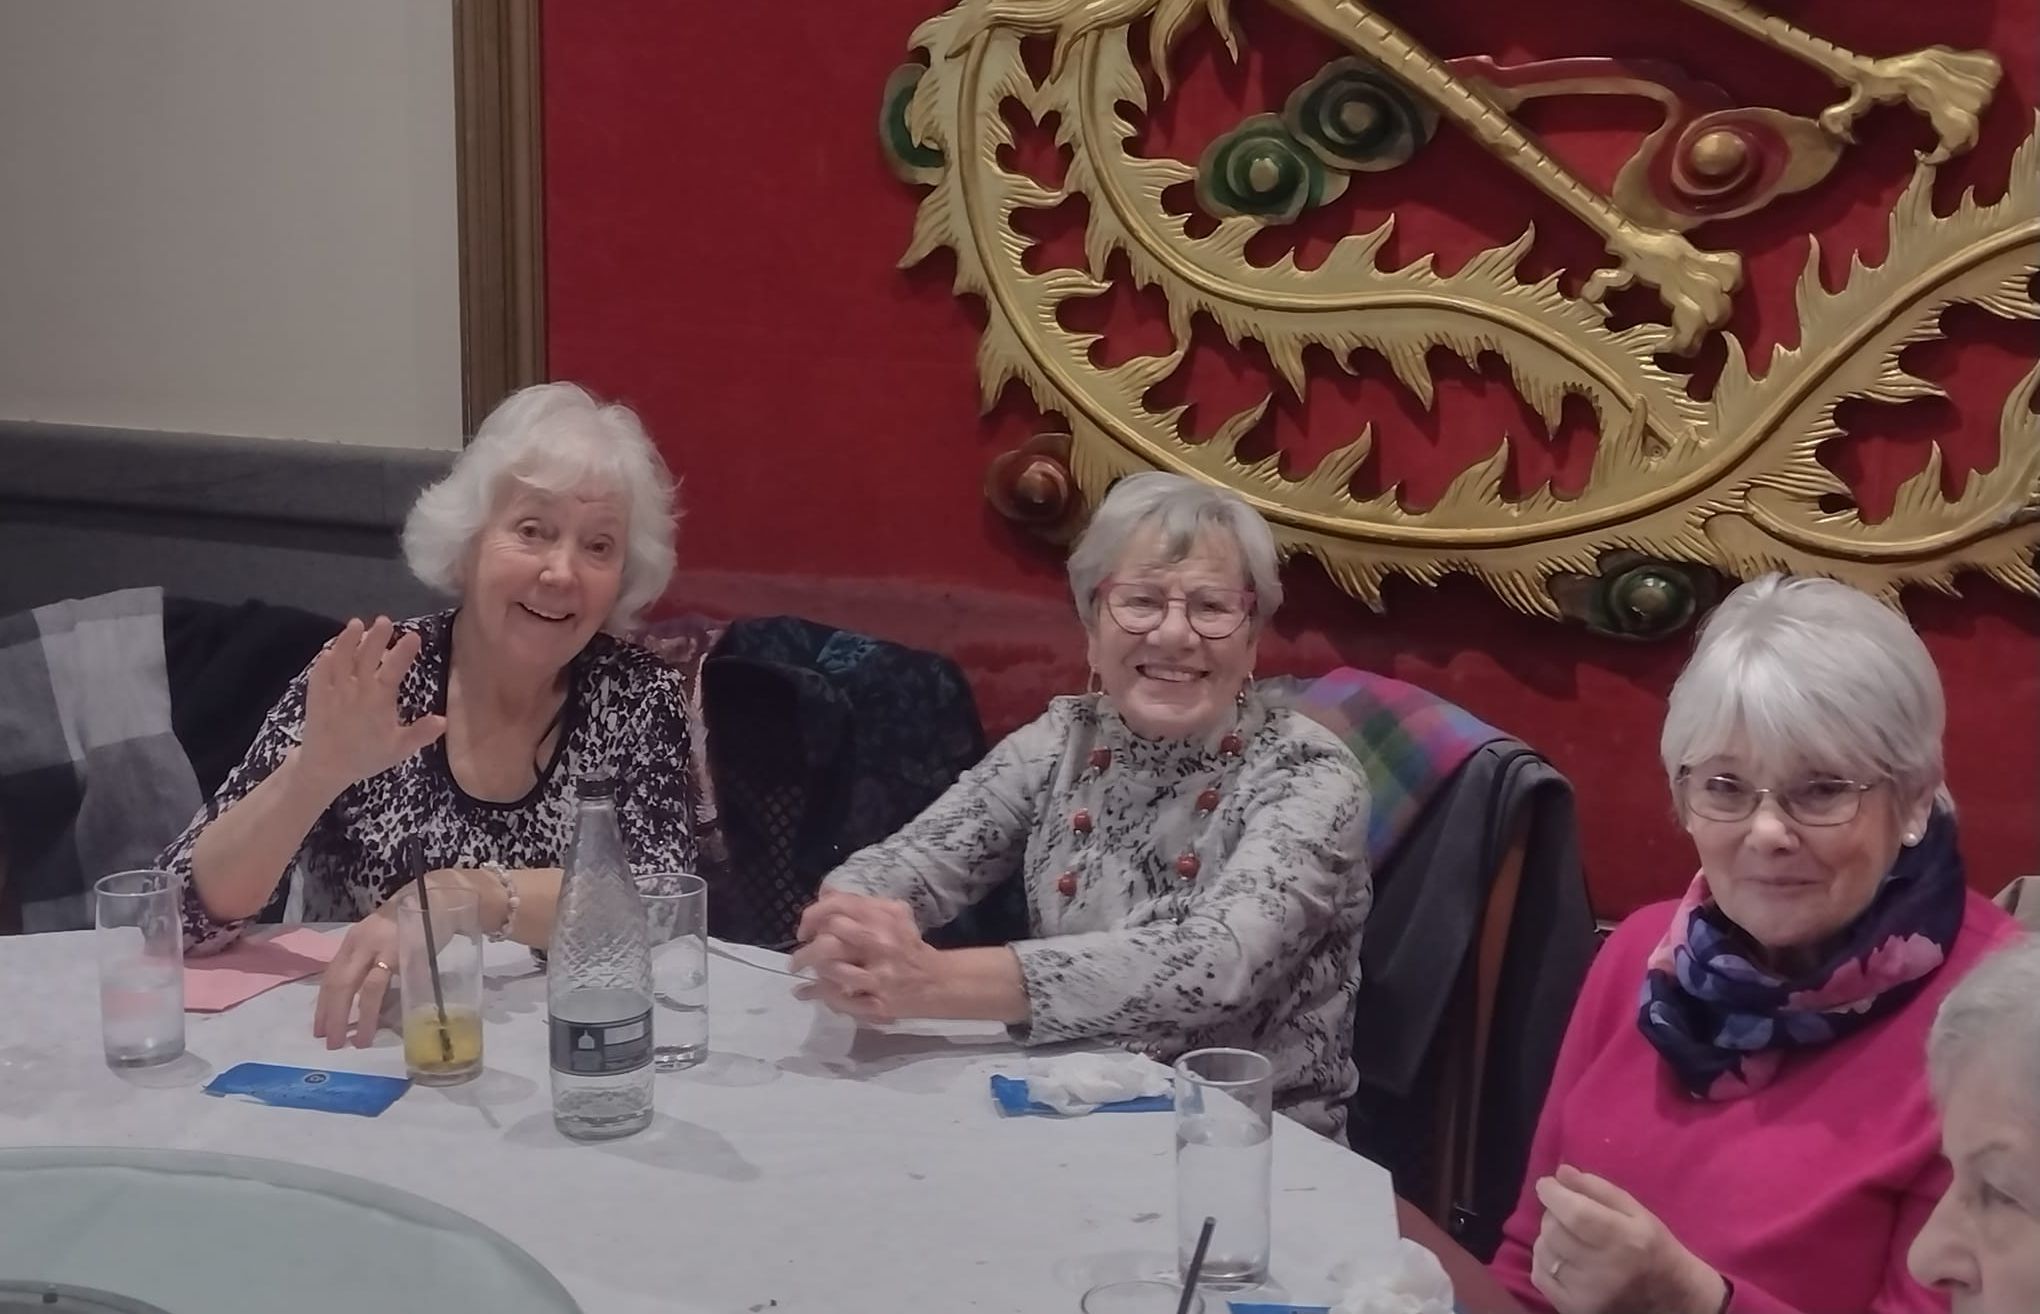 Ormskirk and Southport Oddfellows says it will do all it can to help bring people seeking company together this spring. 50 members visited Tai Pan restaurant in Liverpool to celebrate Chinese New Year